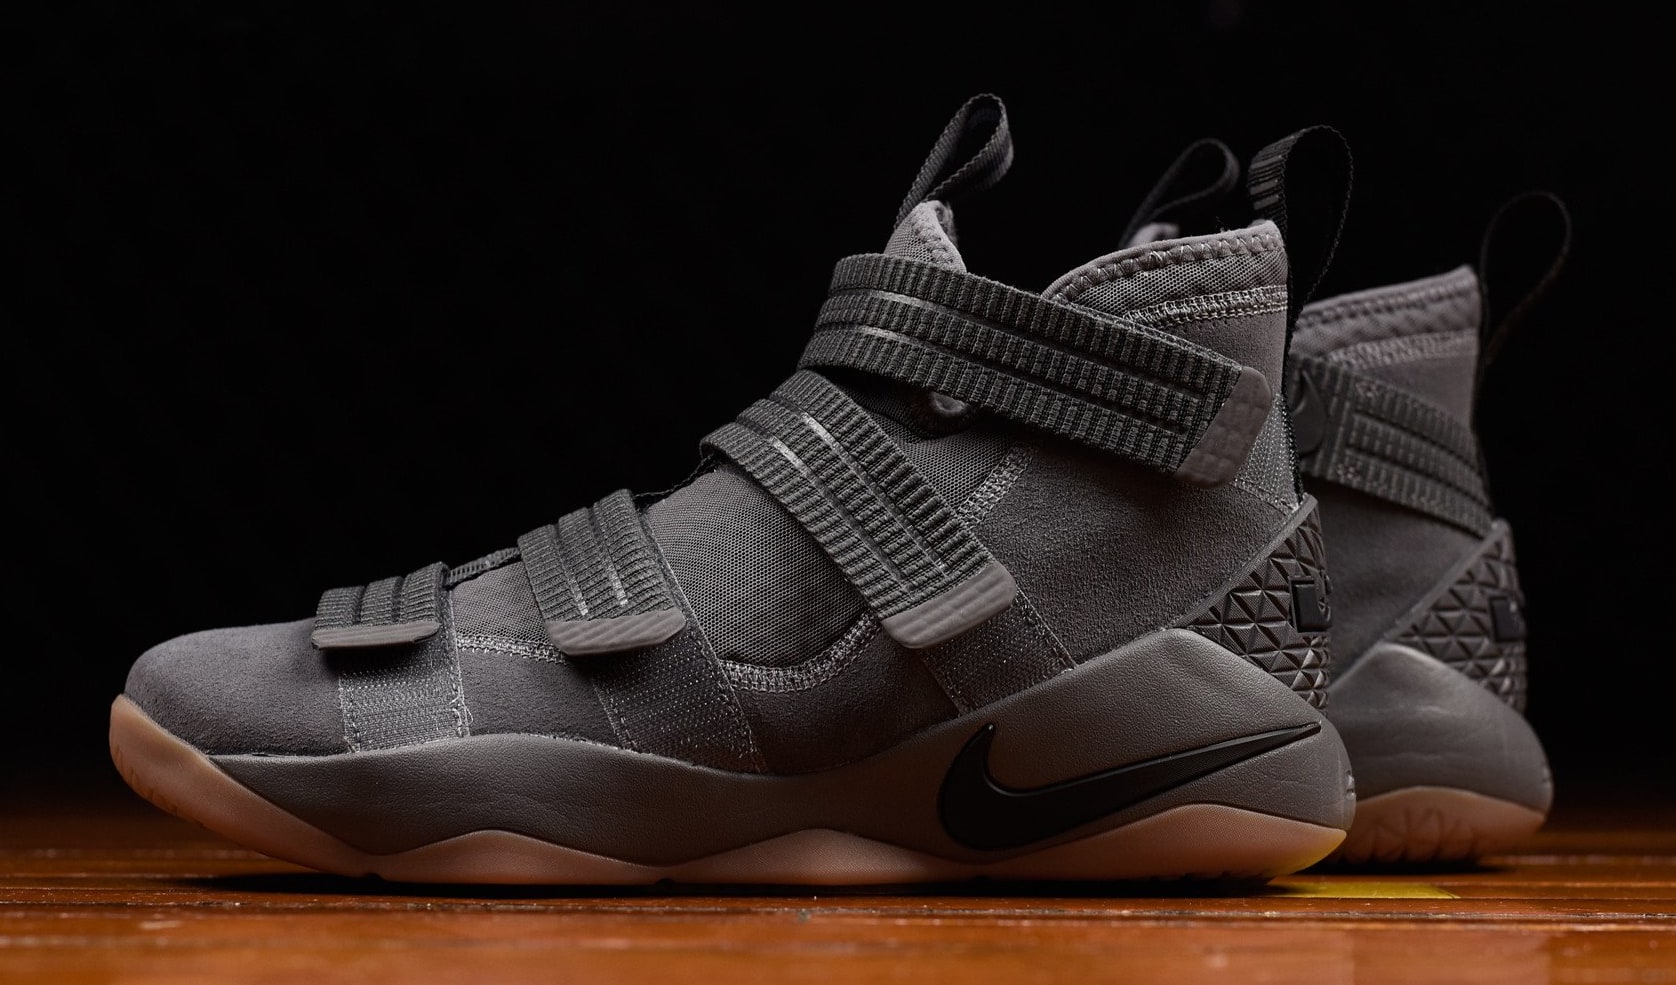 soldier 11 review